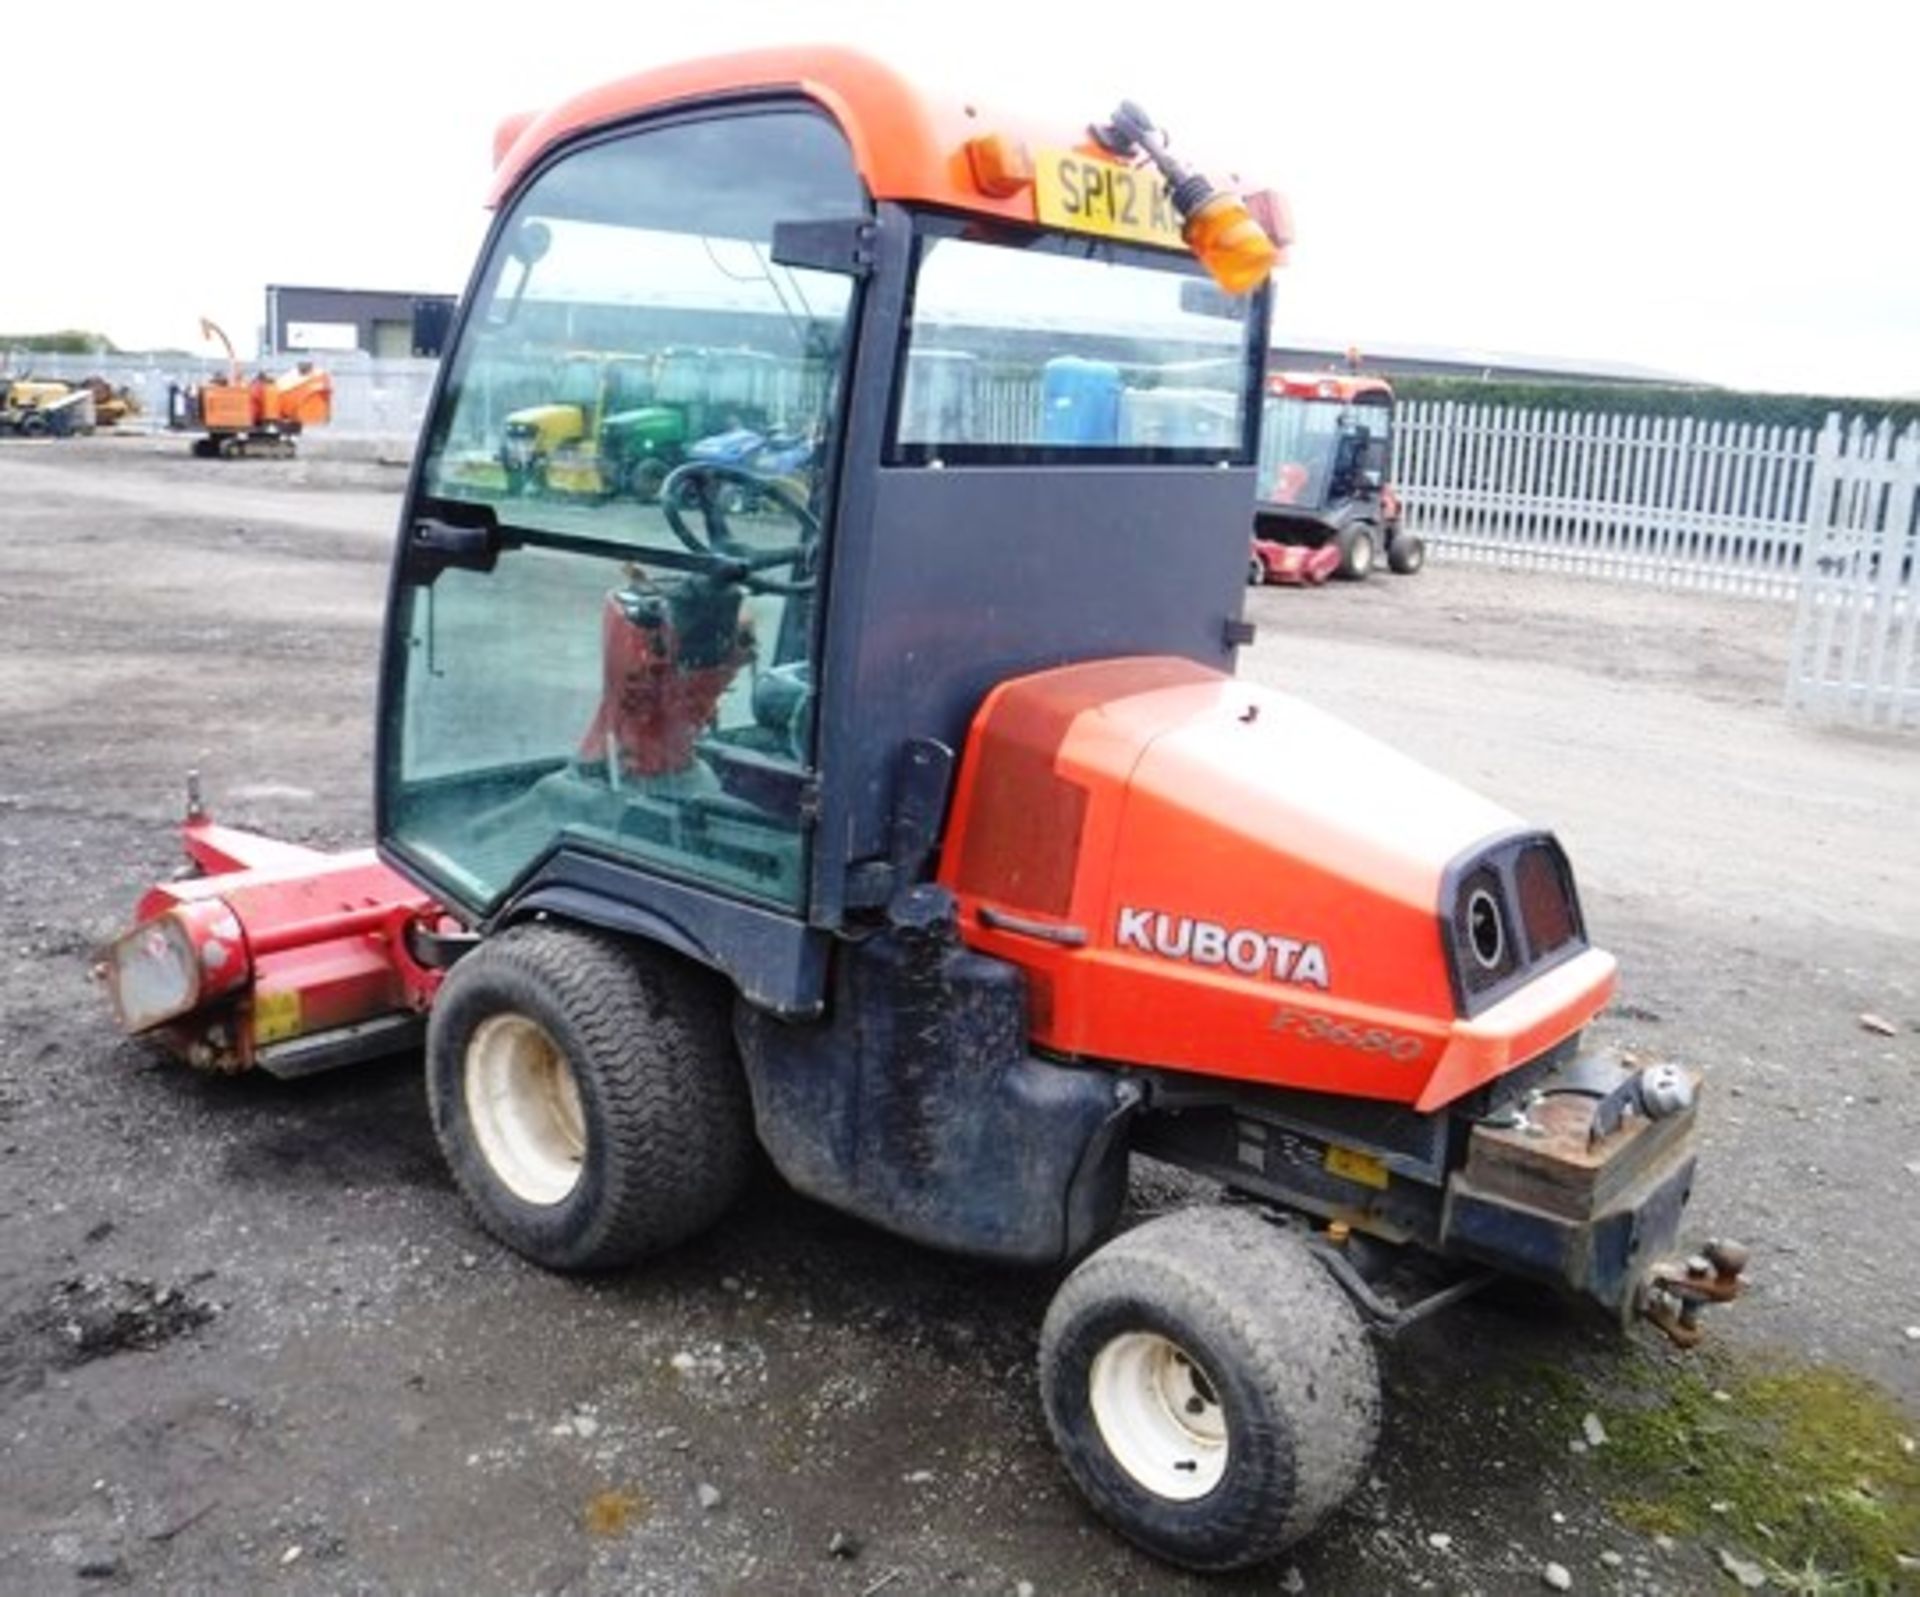 2012 KUBOTA 3680FC. Reg No SP12 AHL c/w flaildeck 155 out front mower. 1545hrs (not verified). This - Image 9 of 12